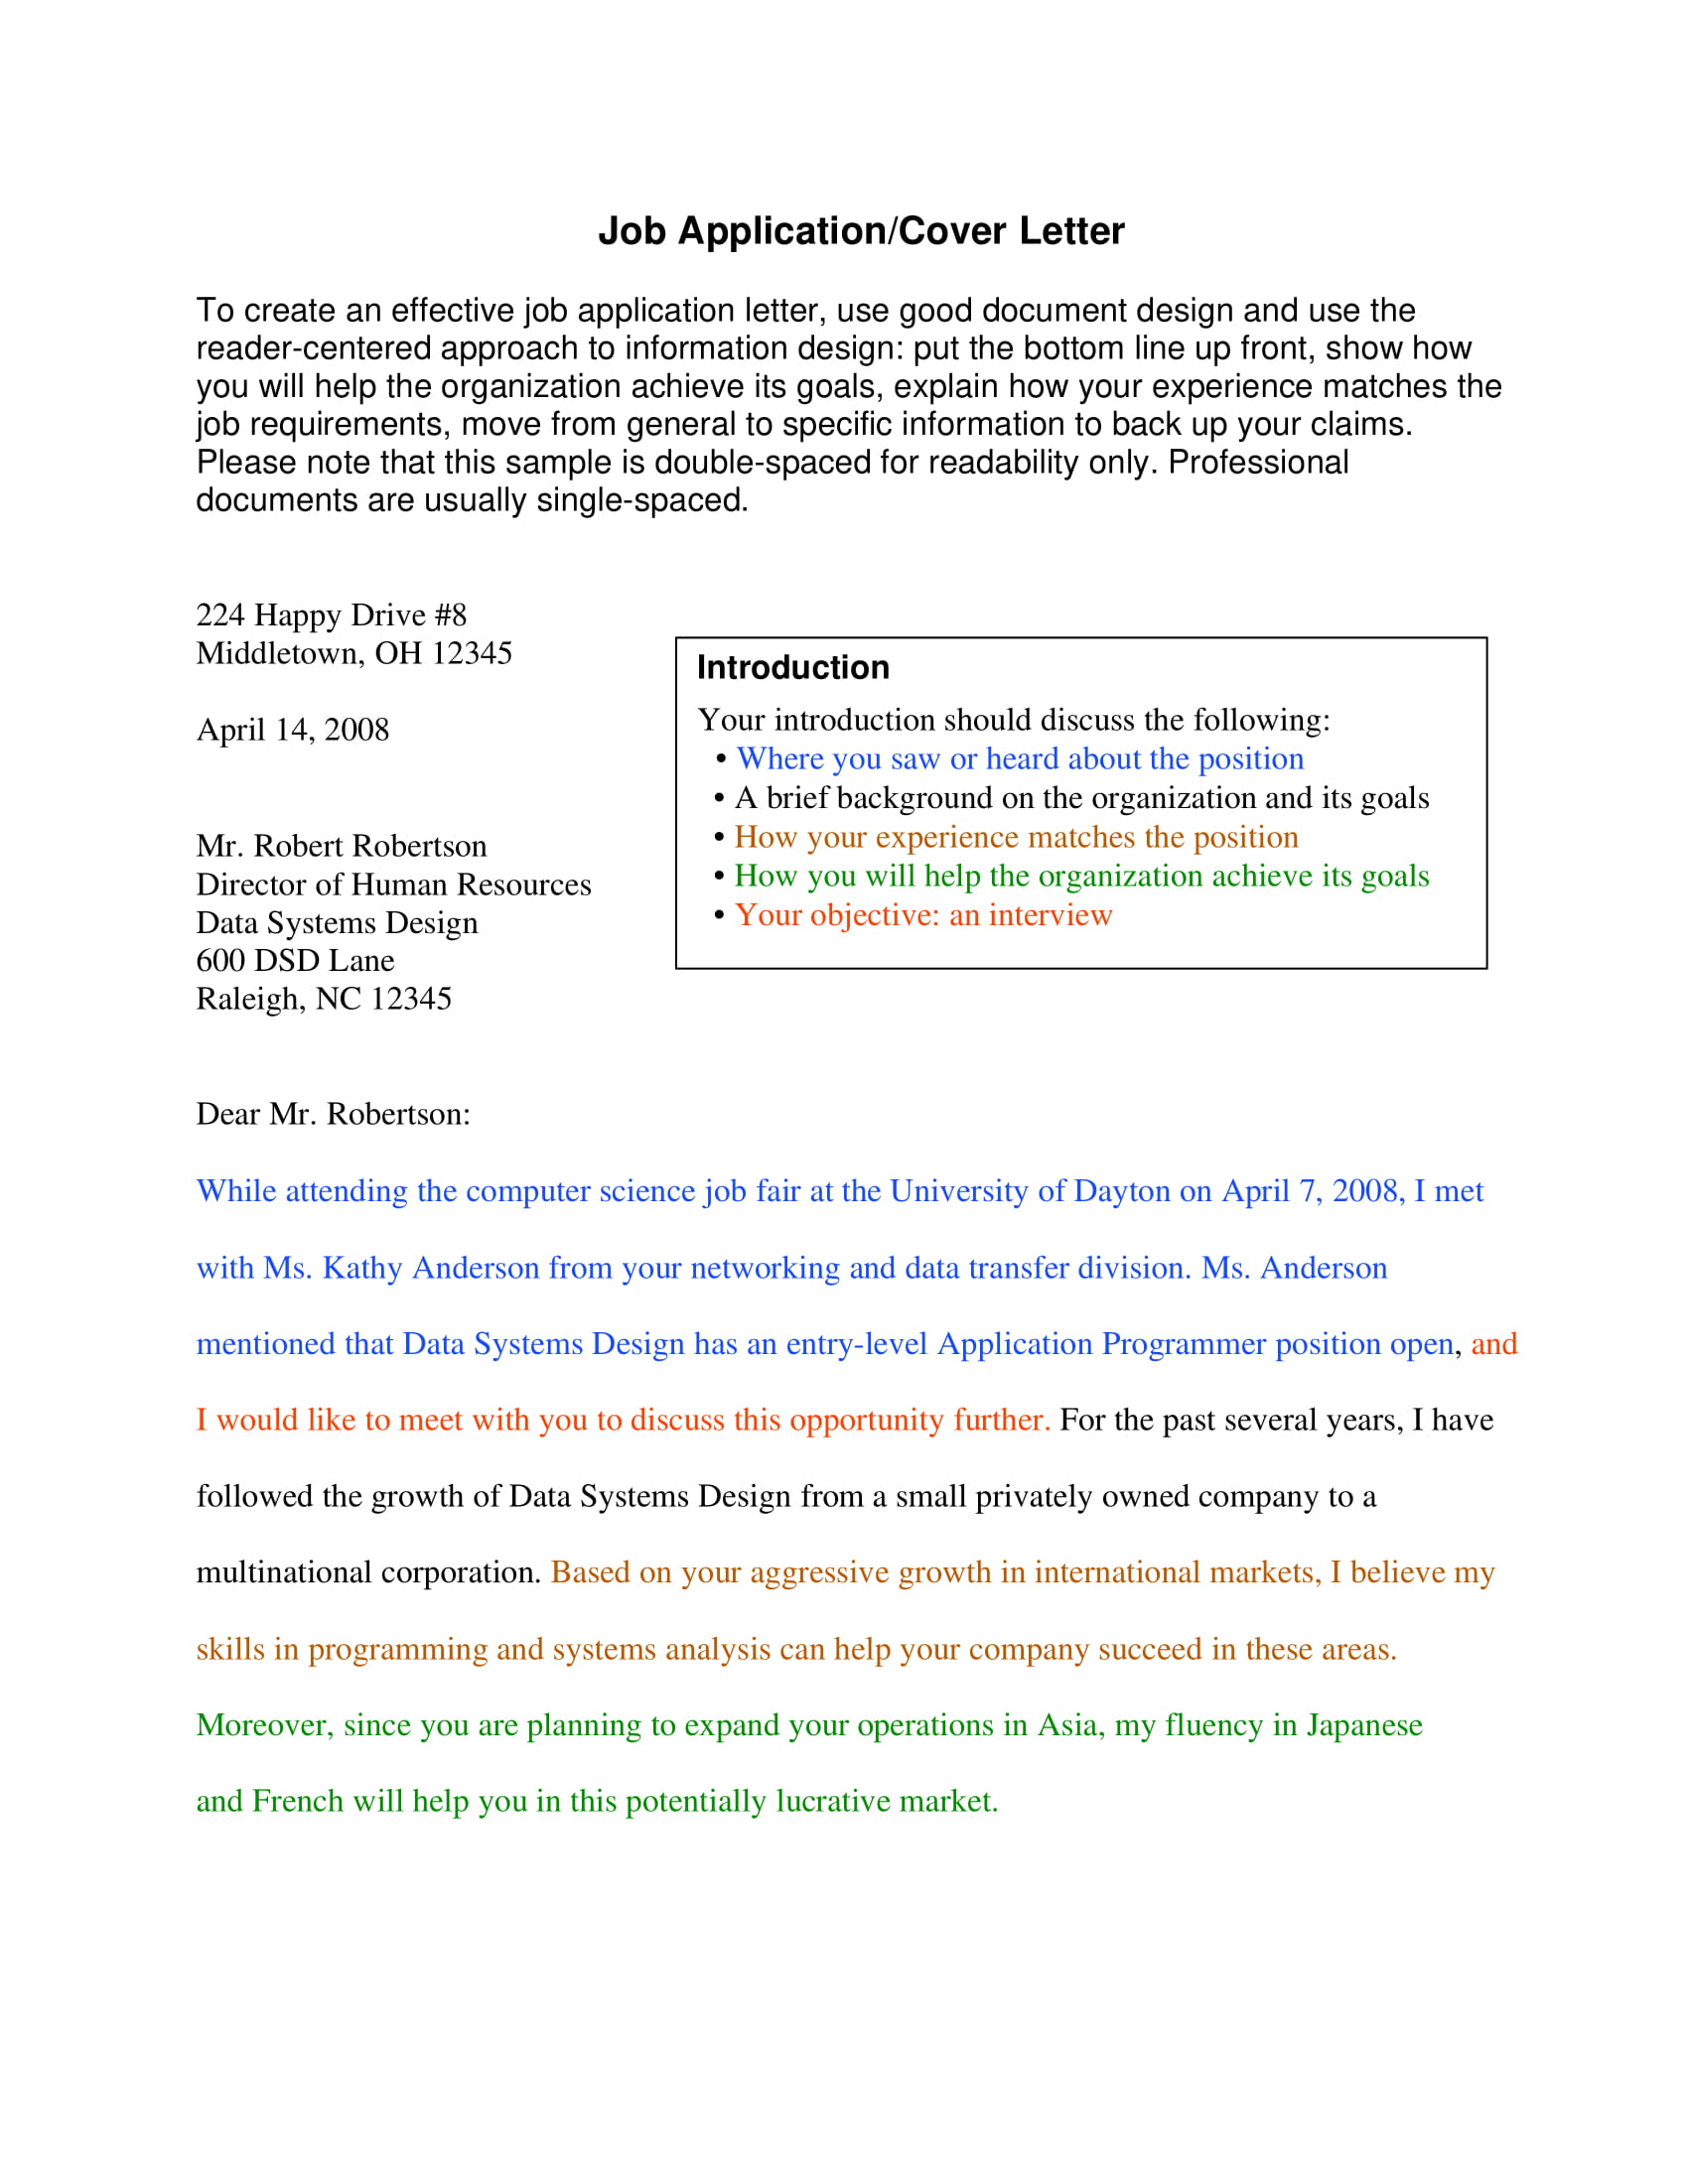 Examples good job application cover letters